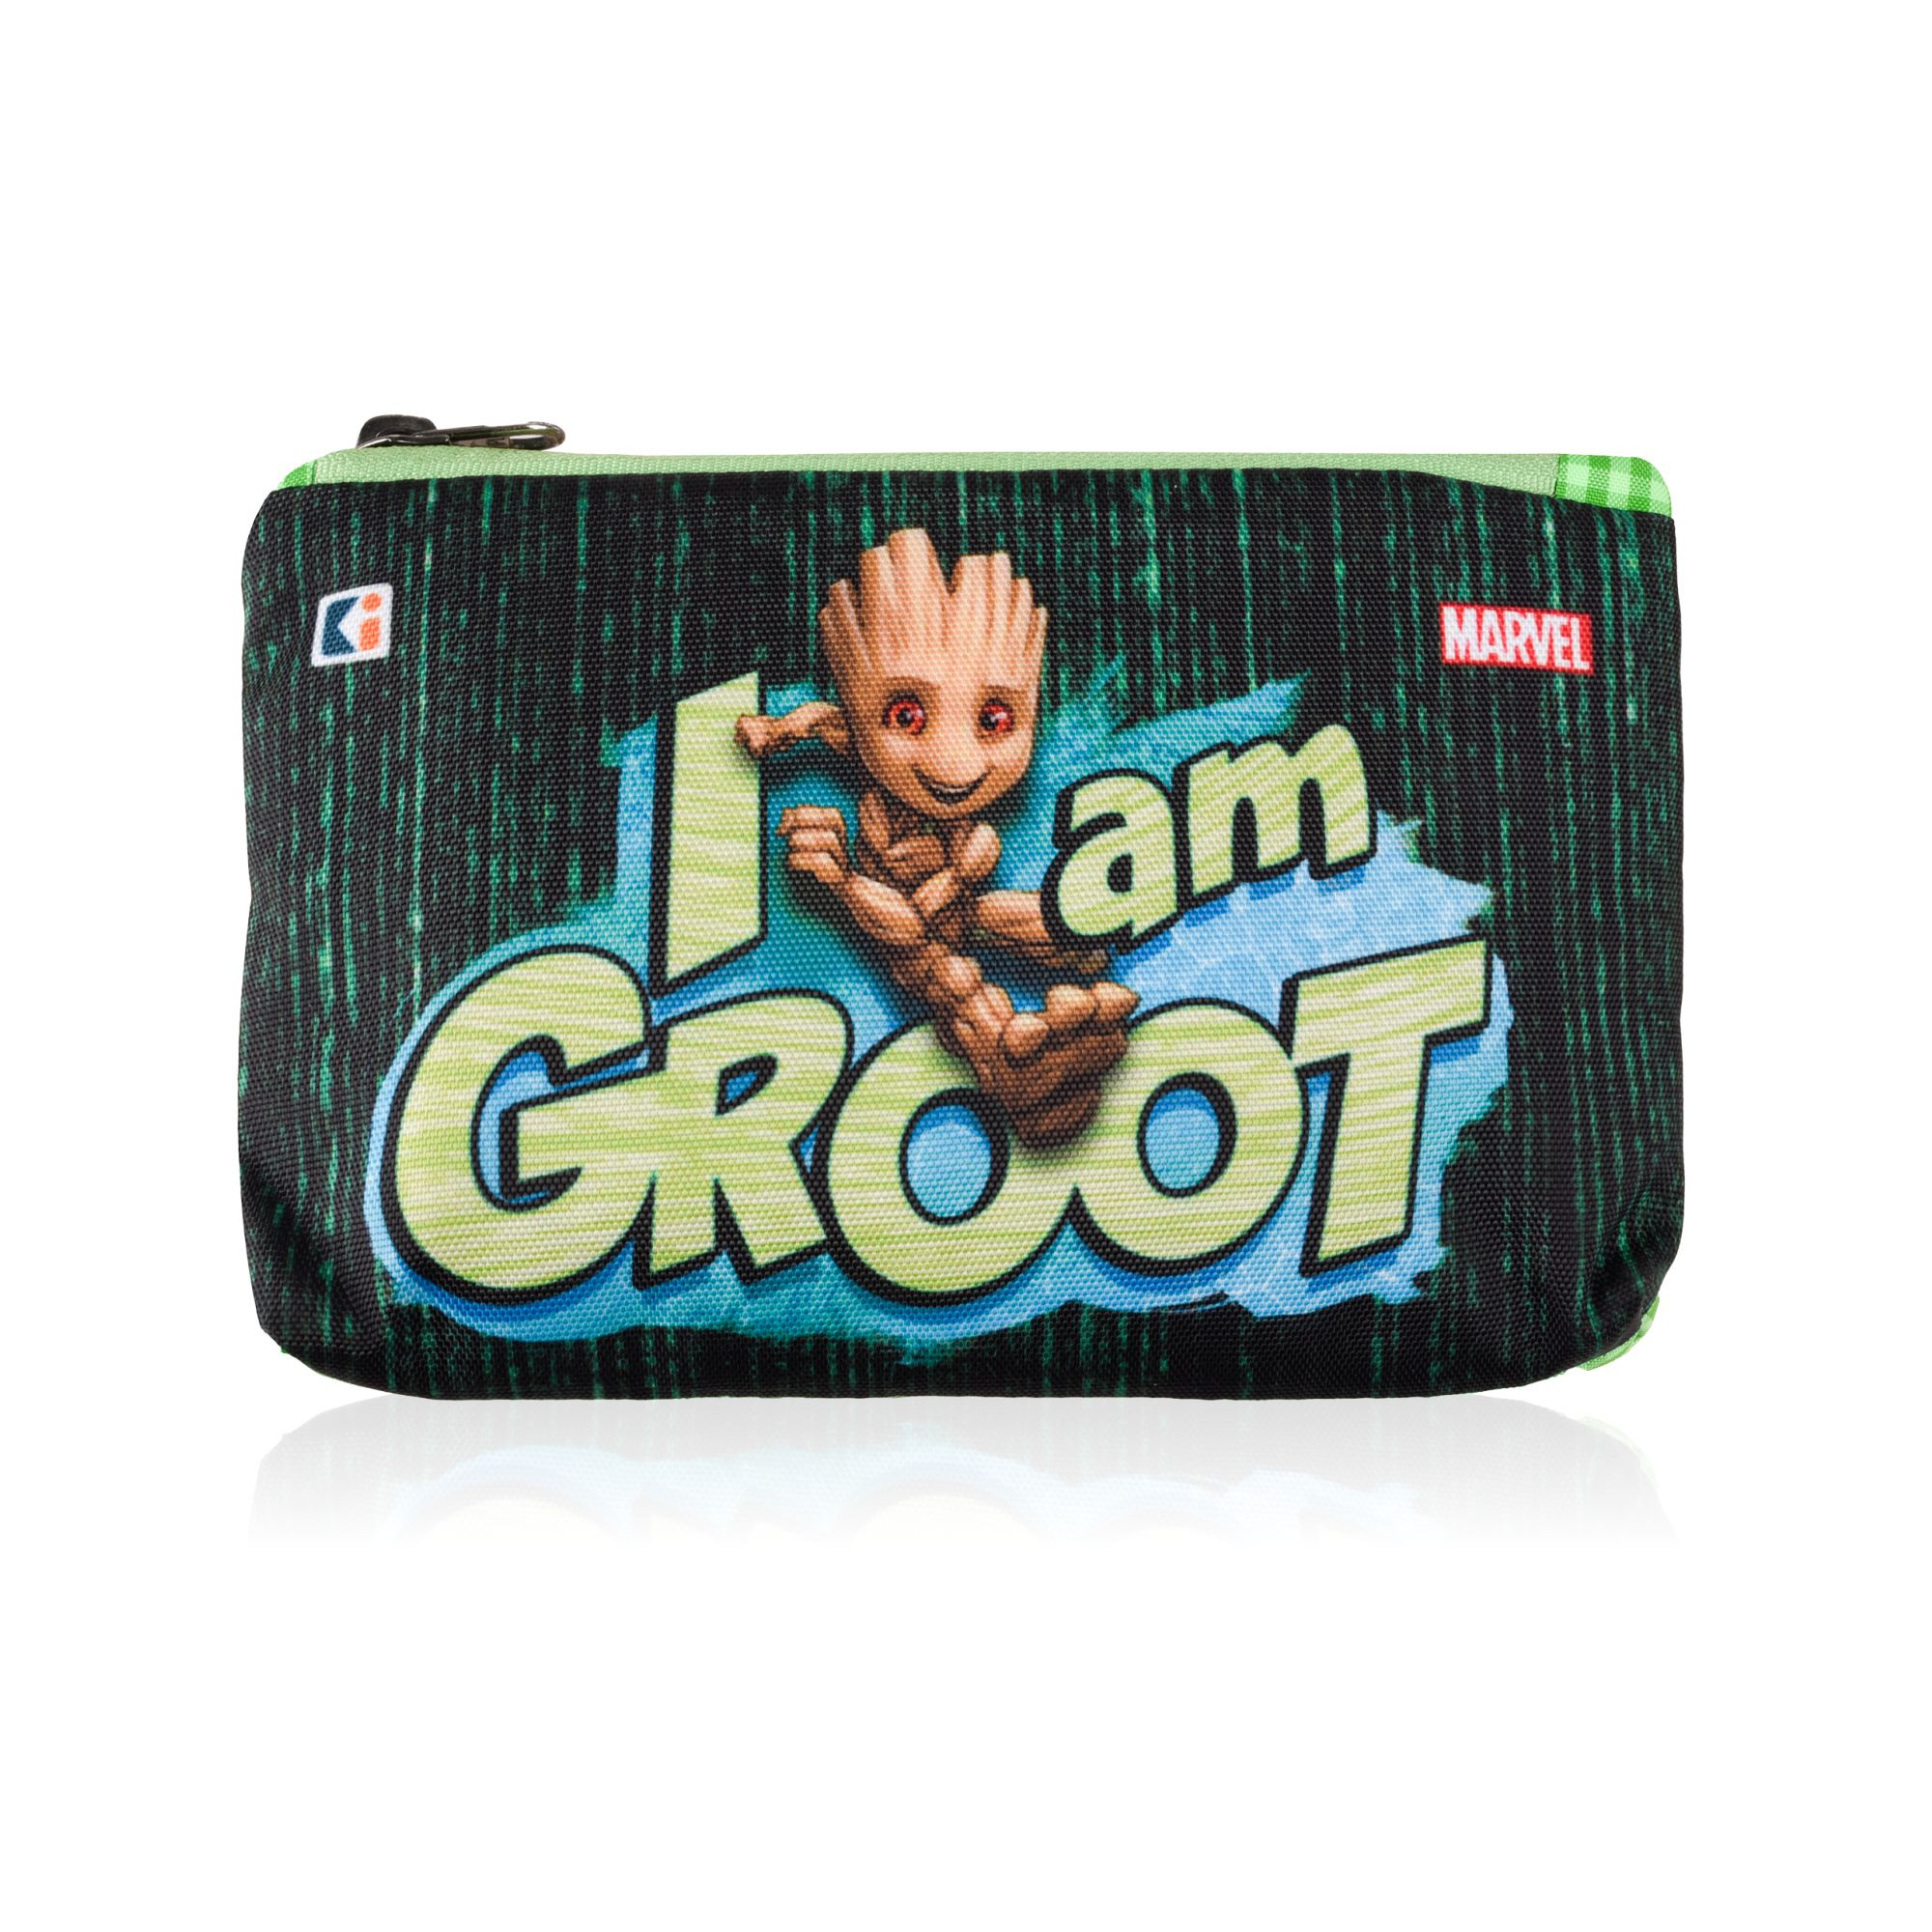 Kuber Industries Pencil Pouch | Square Stationary Pouch | Pen-Pencil Box for Kids | School Geometry Pouch | Pencil Utility Bag | Zipper Pencil Organizer | Marvel I am Groot | Green